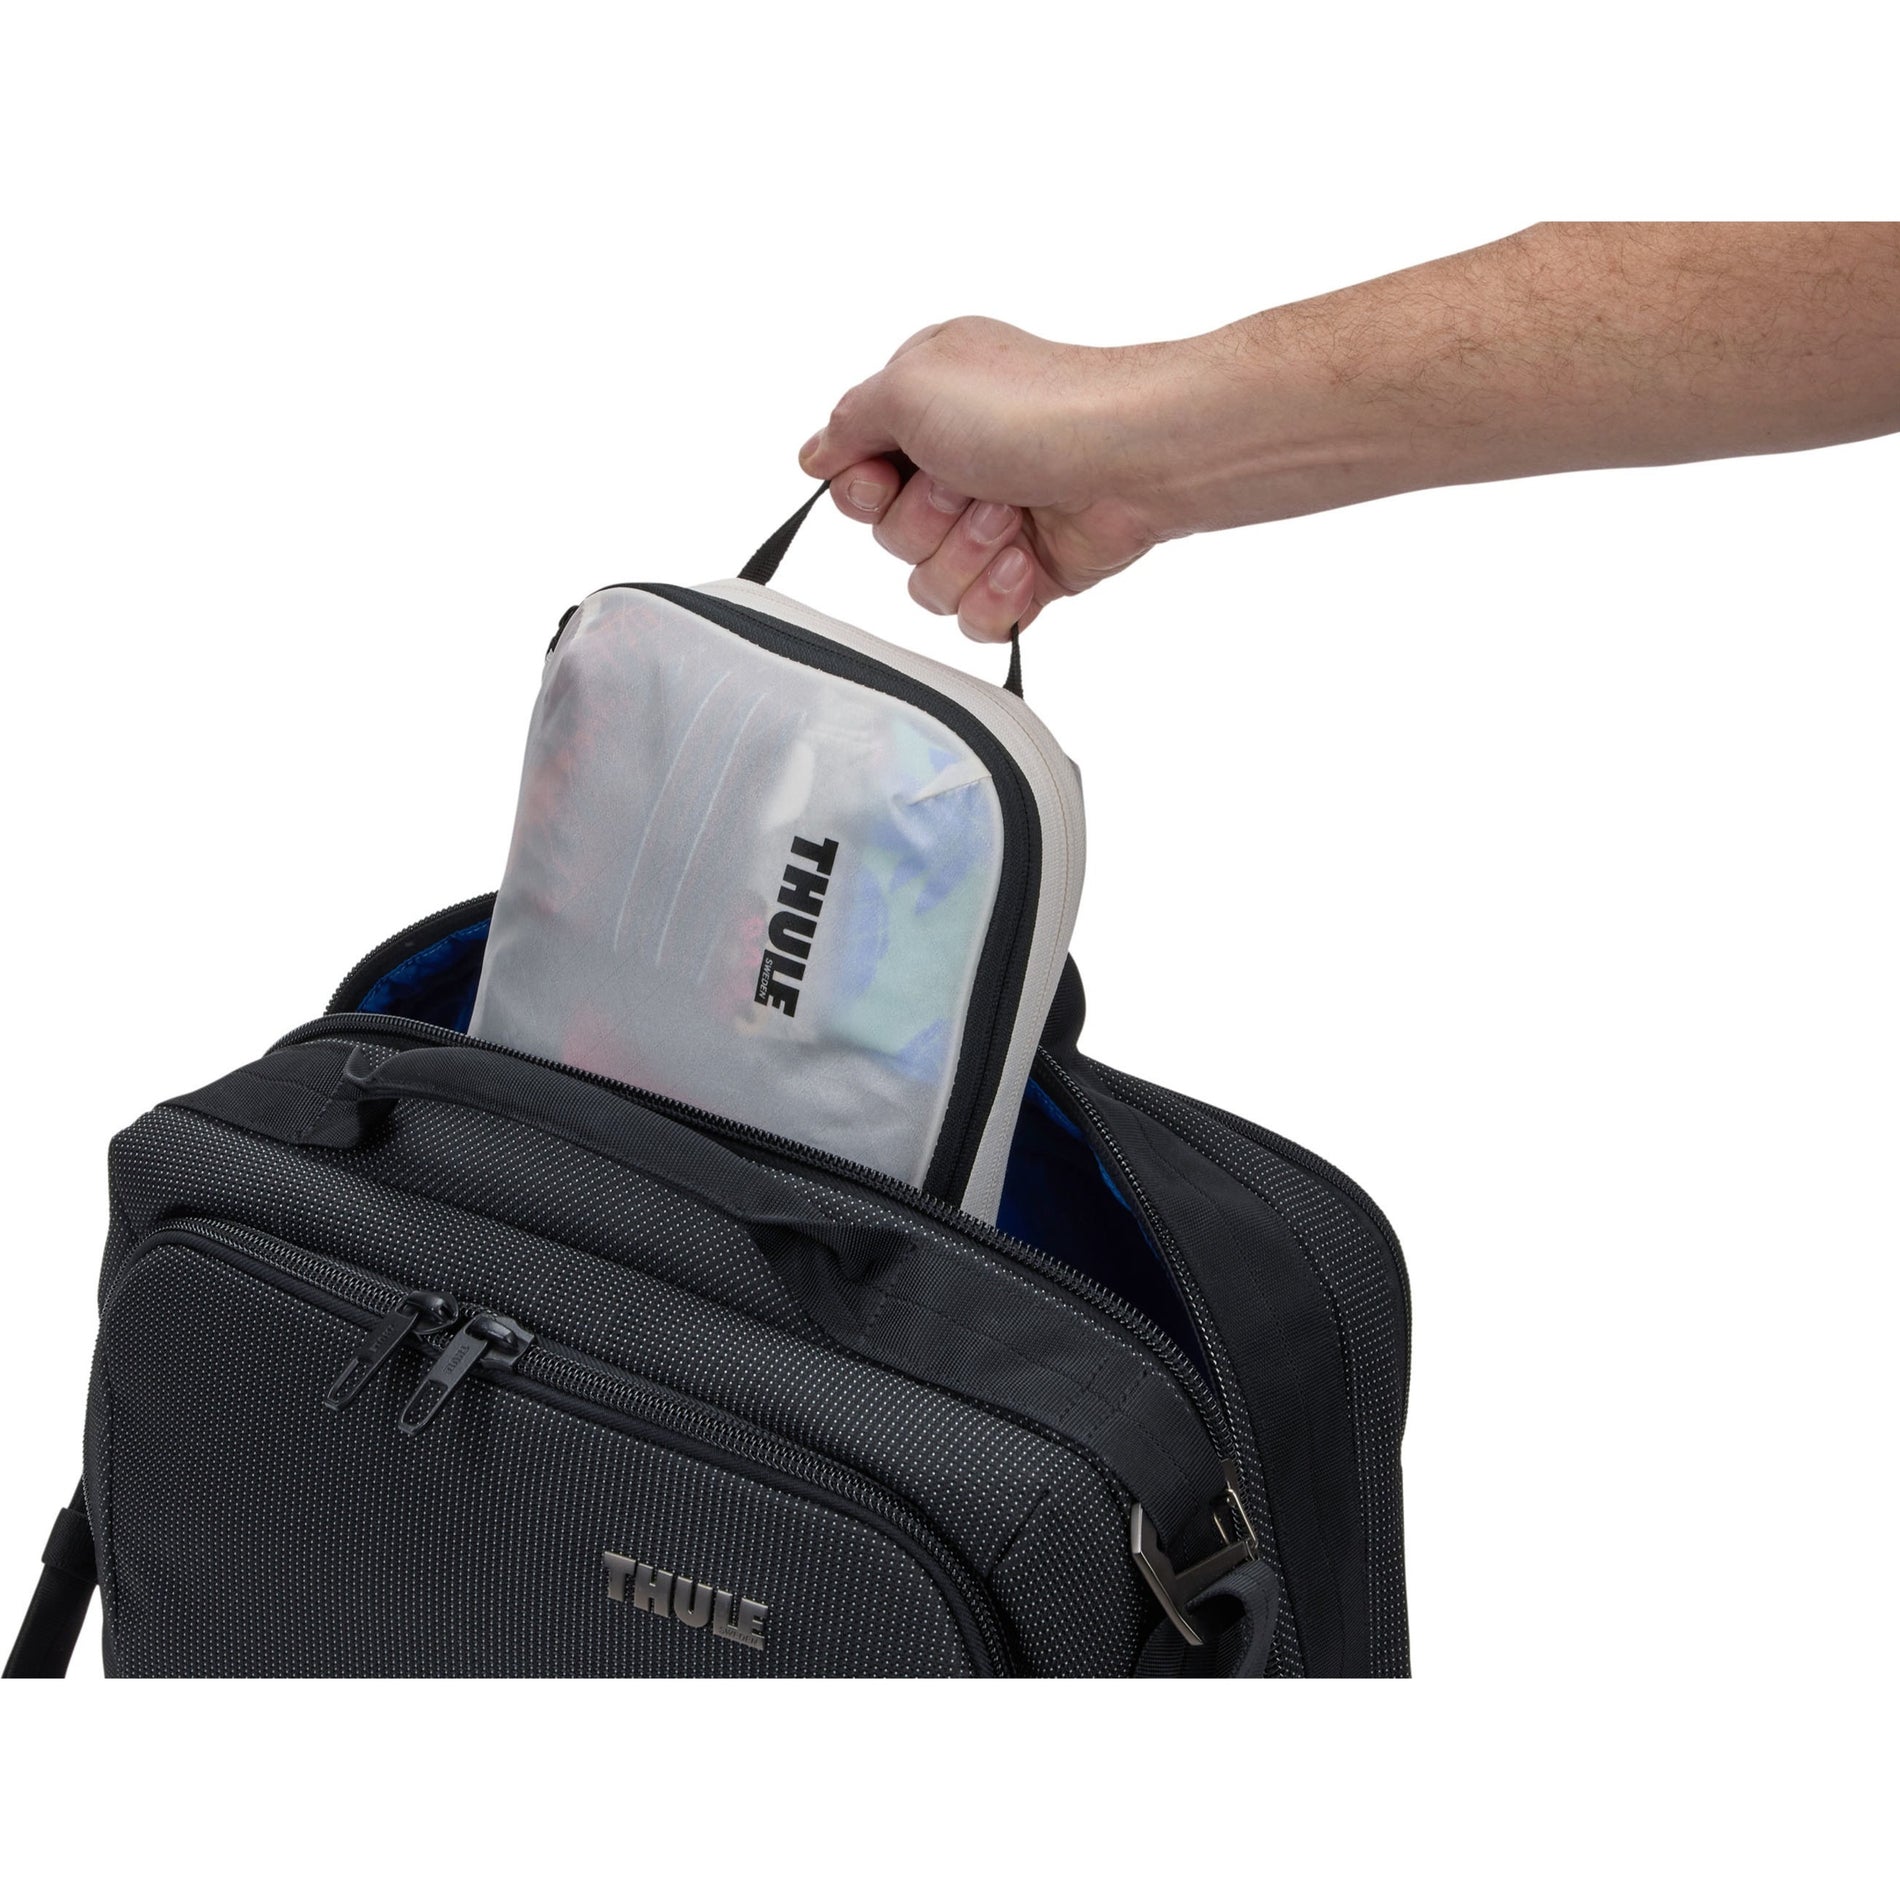 Thule (3204858) Carrying Case